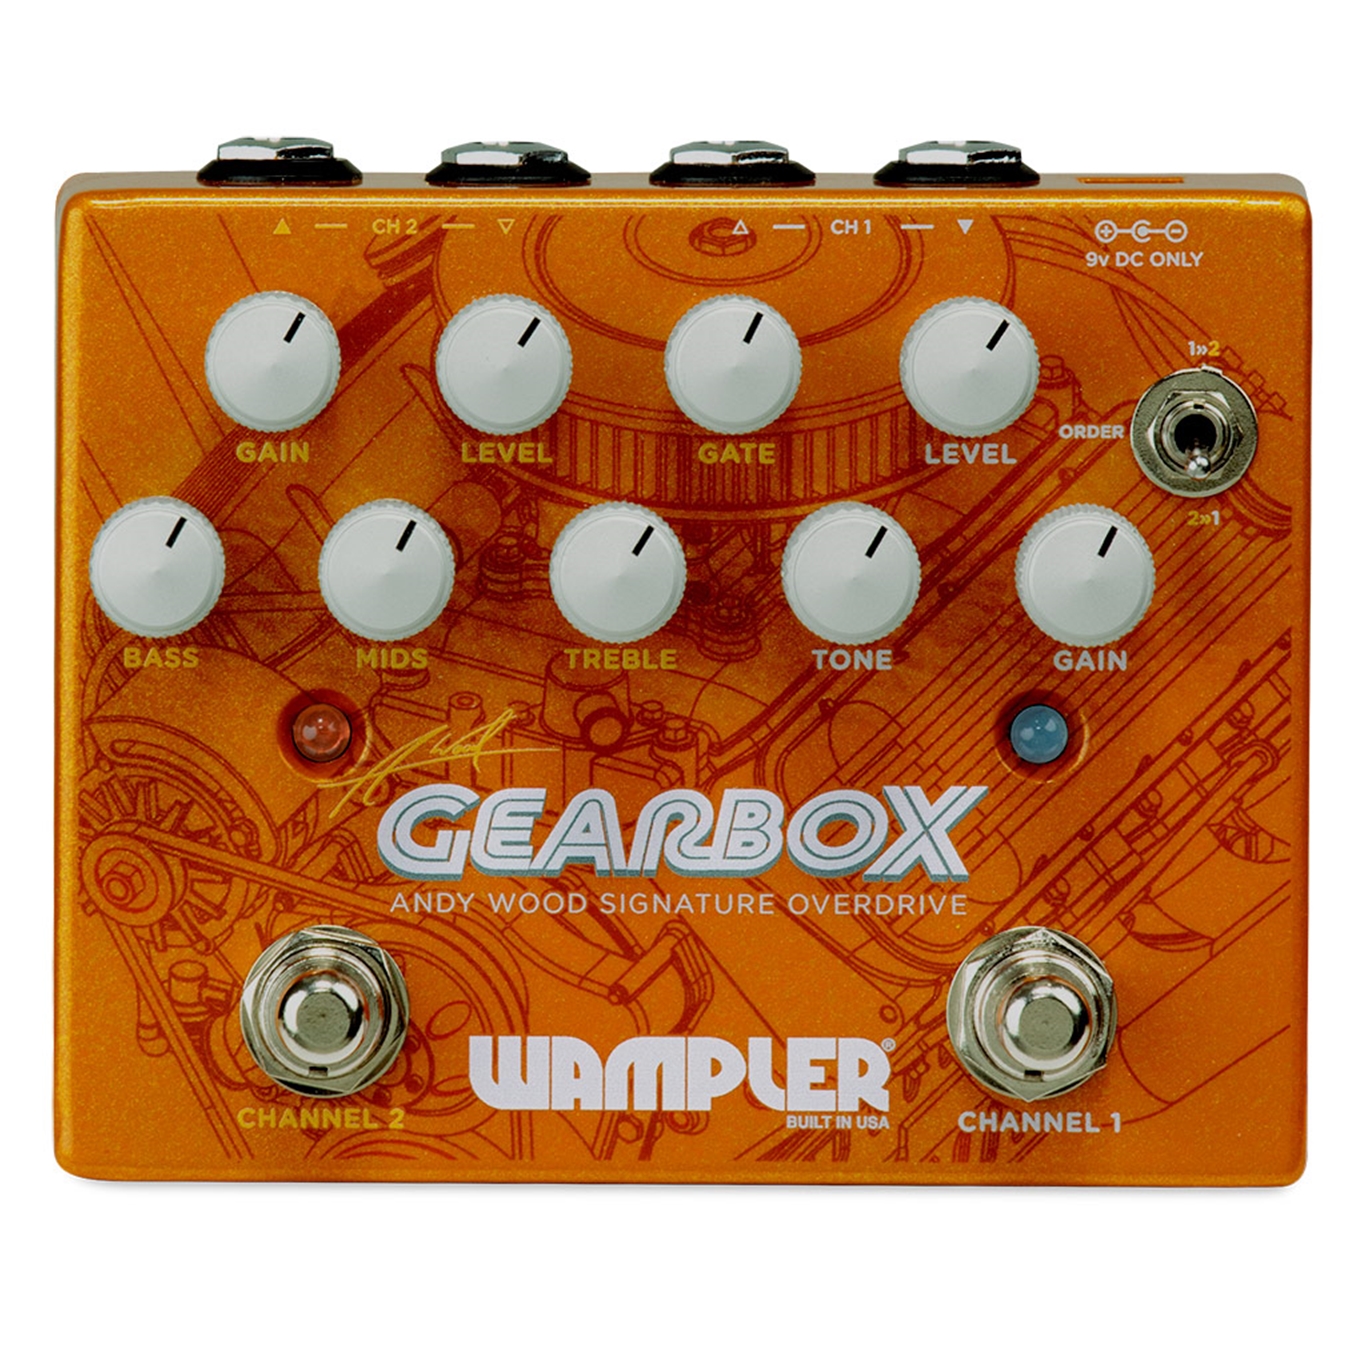 WAMPLER Andy Wood: Gearbox  Signature Overdrive Pedal